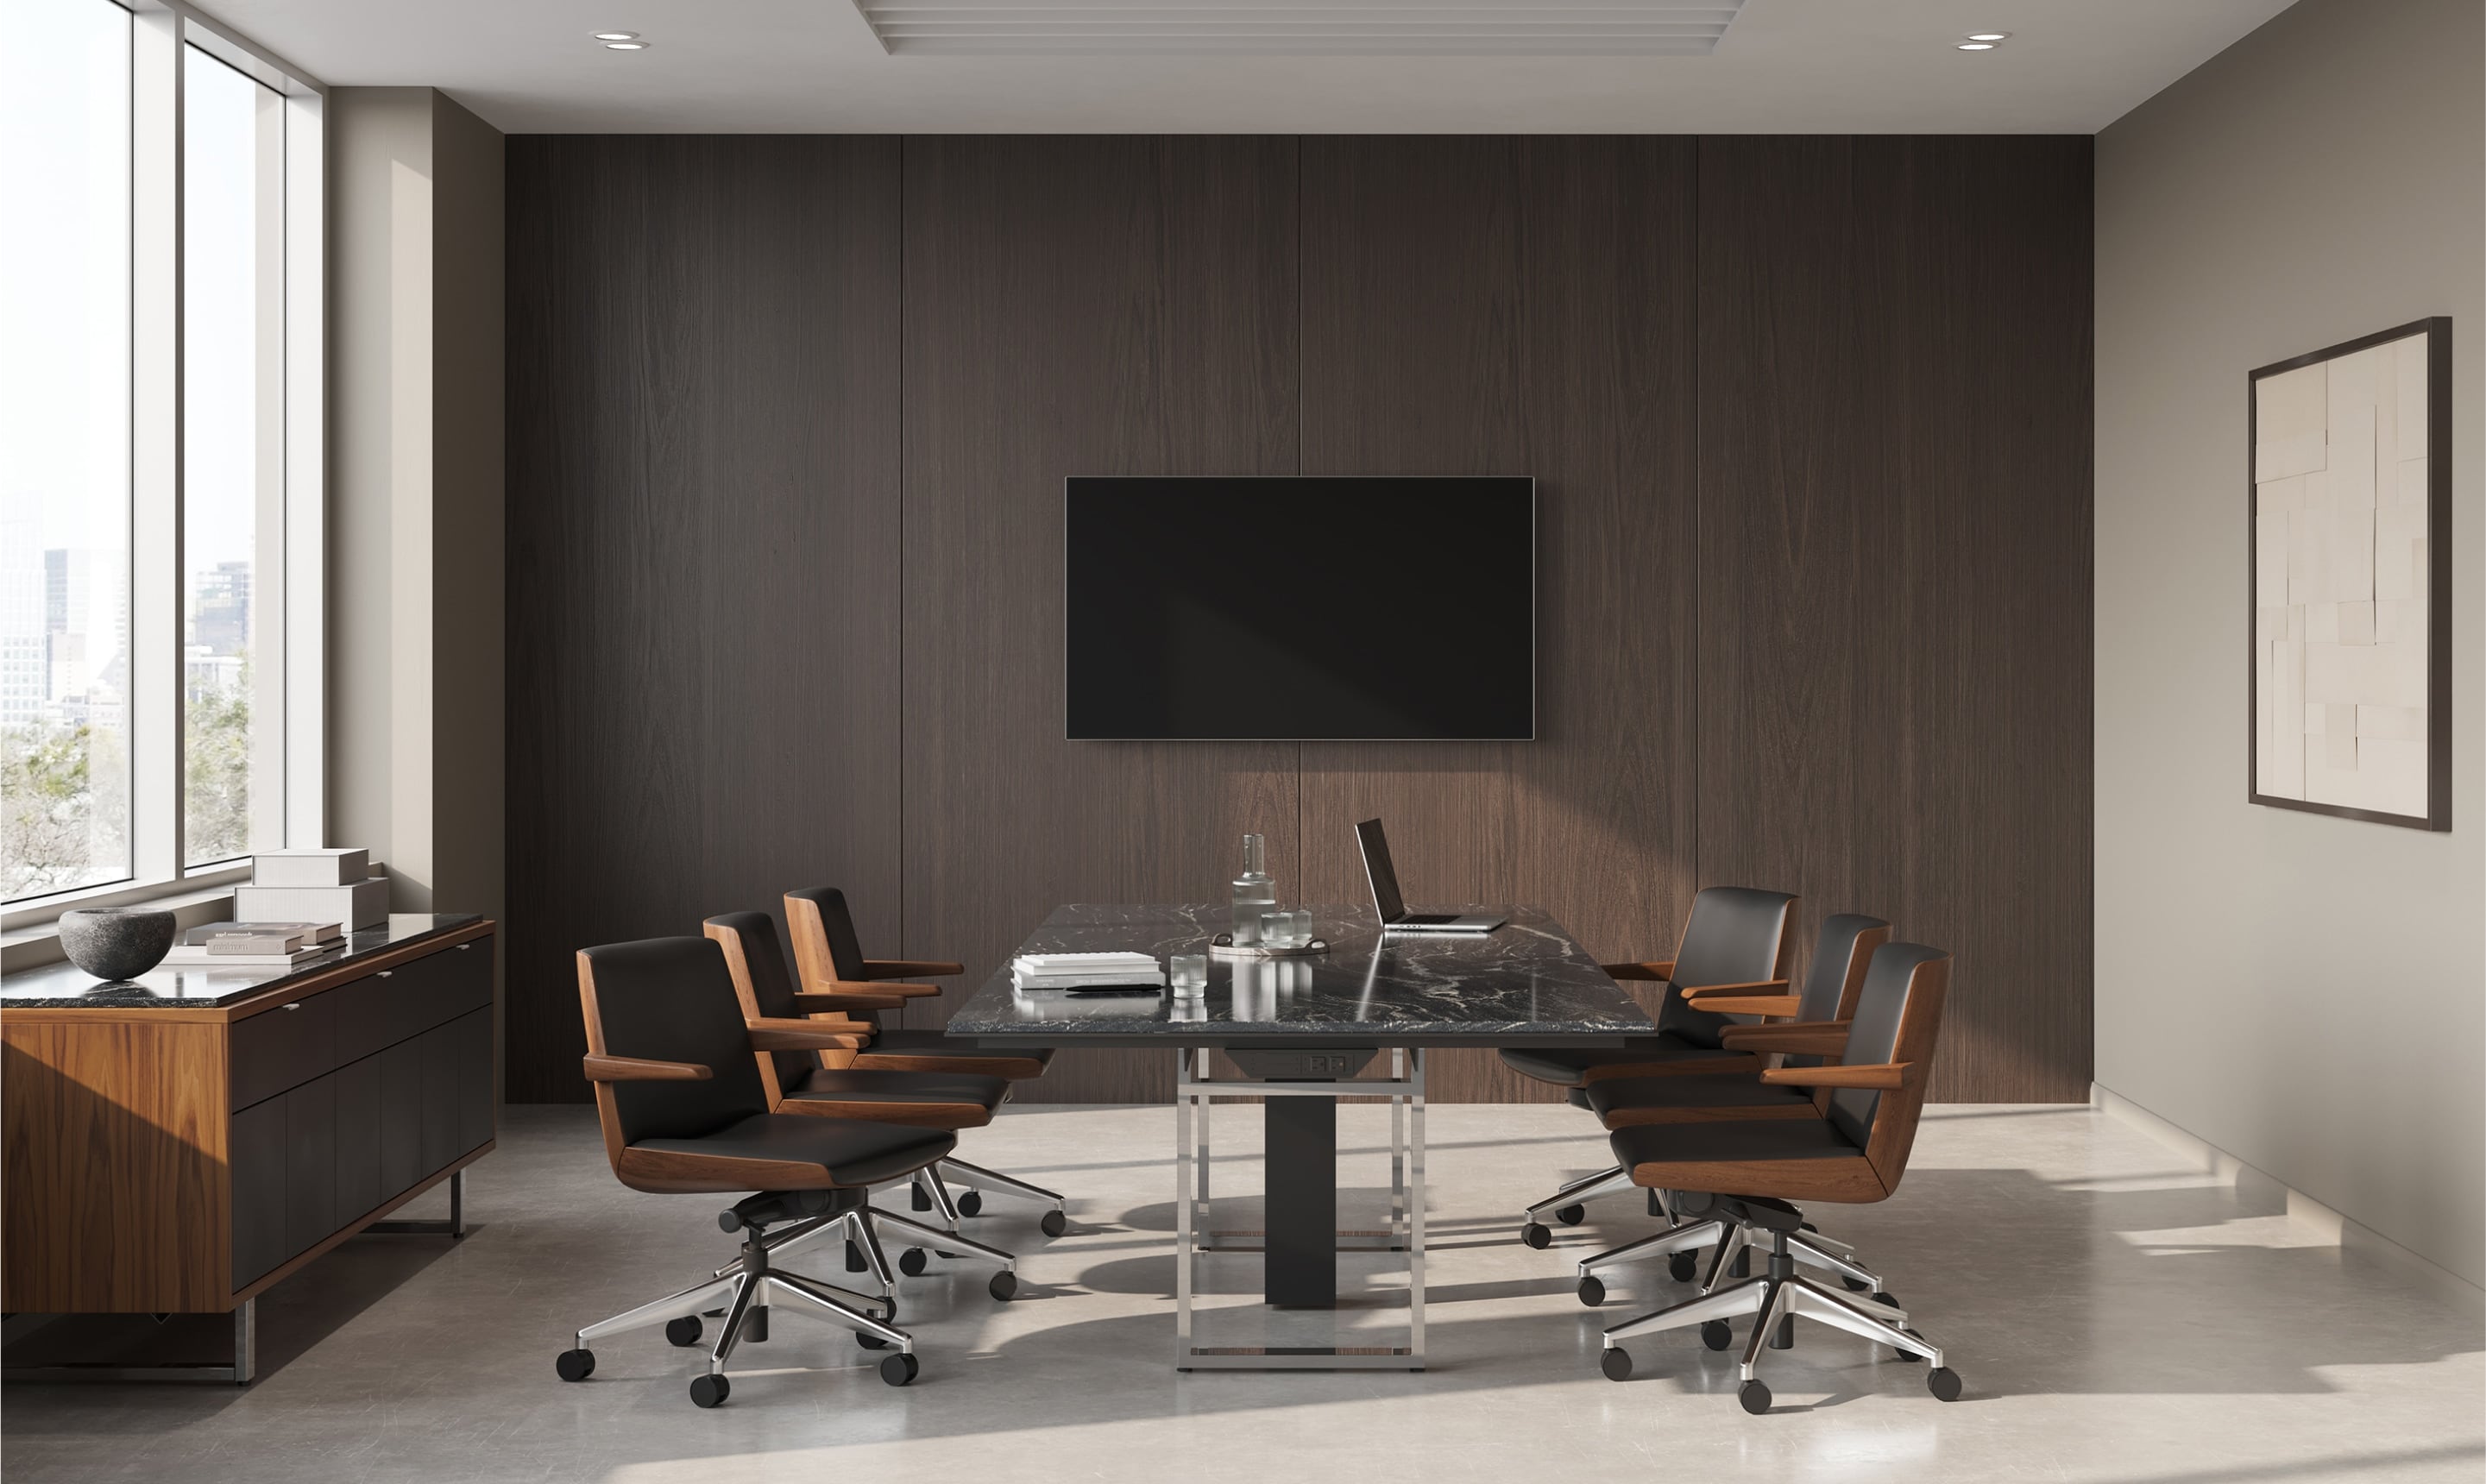 A meeting room featuring a rectangular Axon conference table with a wood top surrounded by six Taper office chairs in camel-colored leather upholstery.